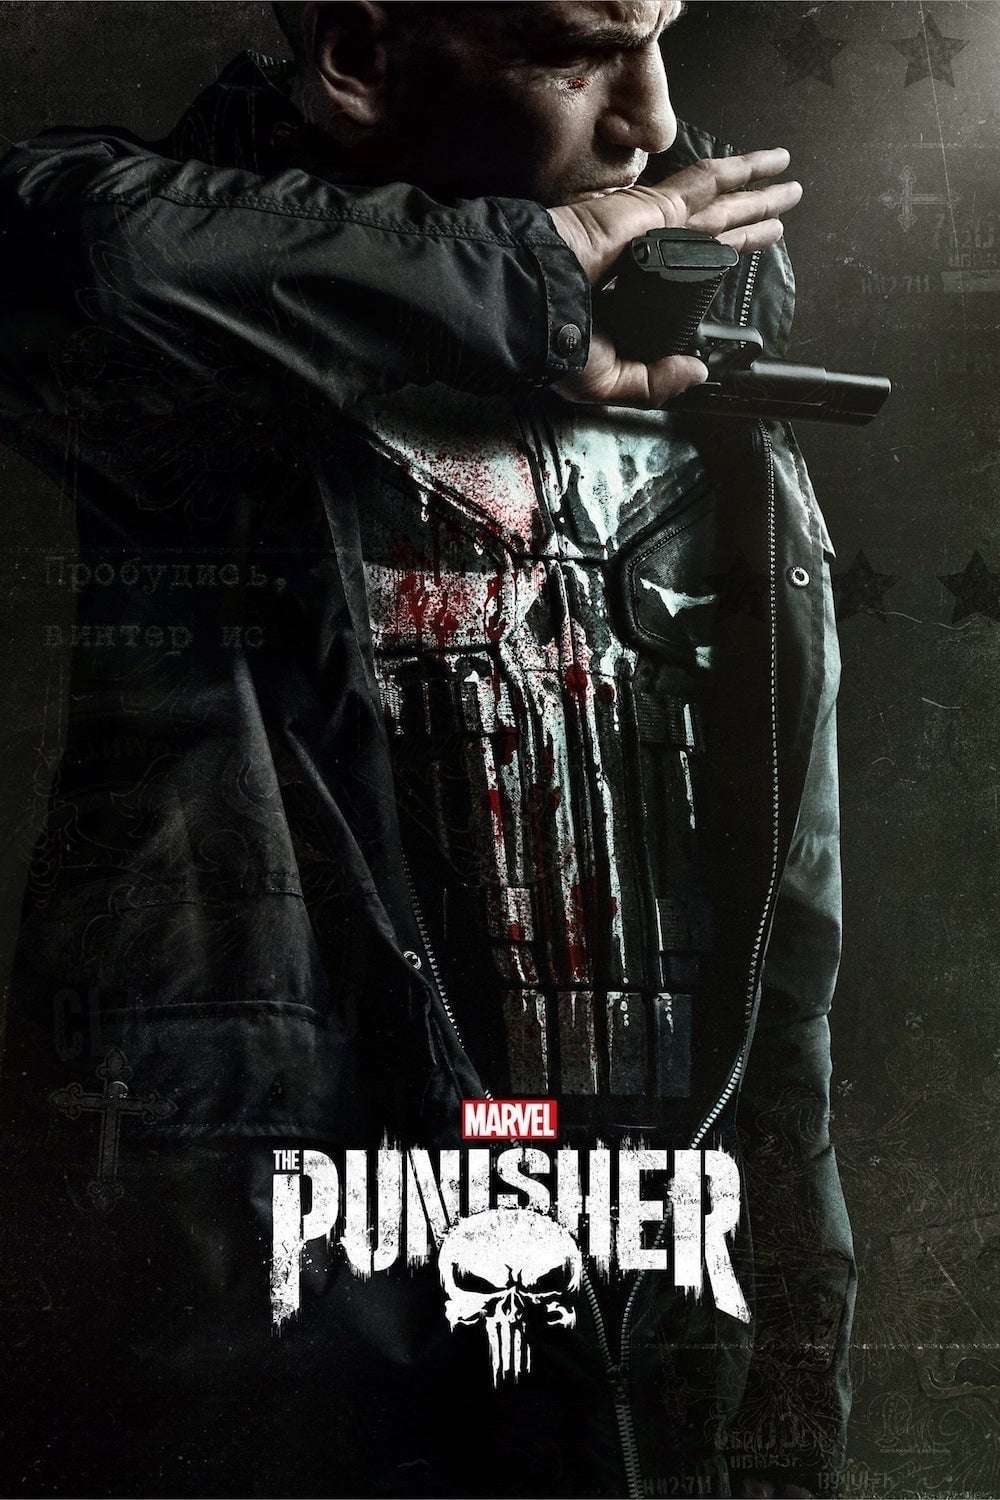 Marvel's The Punisher TV Shows About Justice